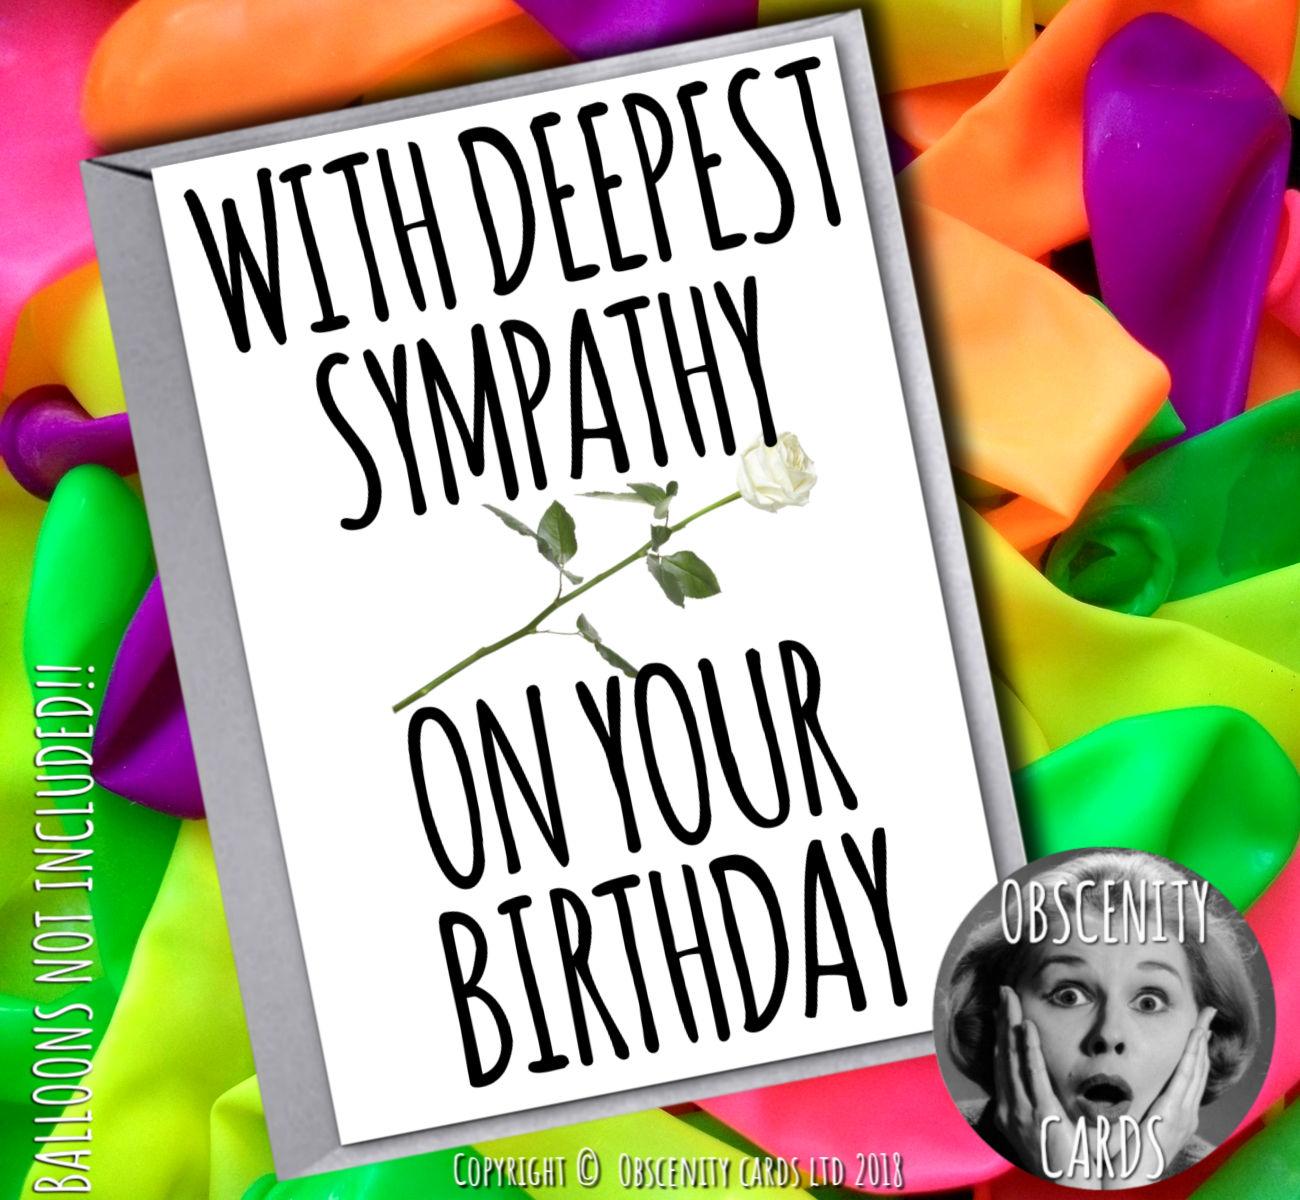 WITH DEEPEST SYMPATHY ON YOUR BIRTHDAY